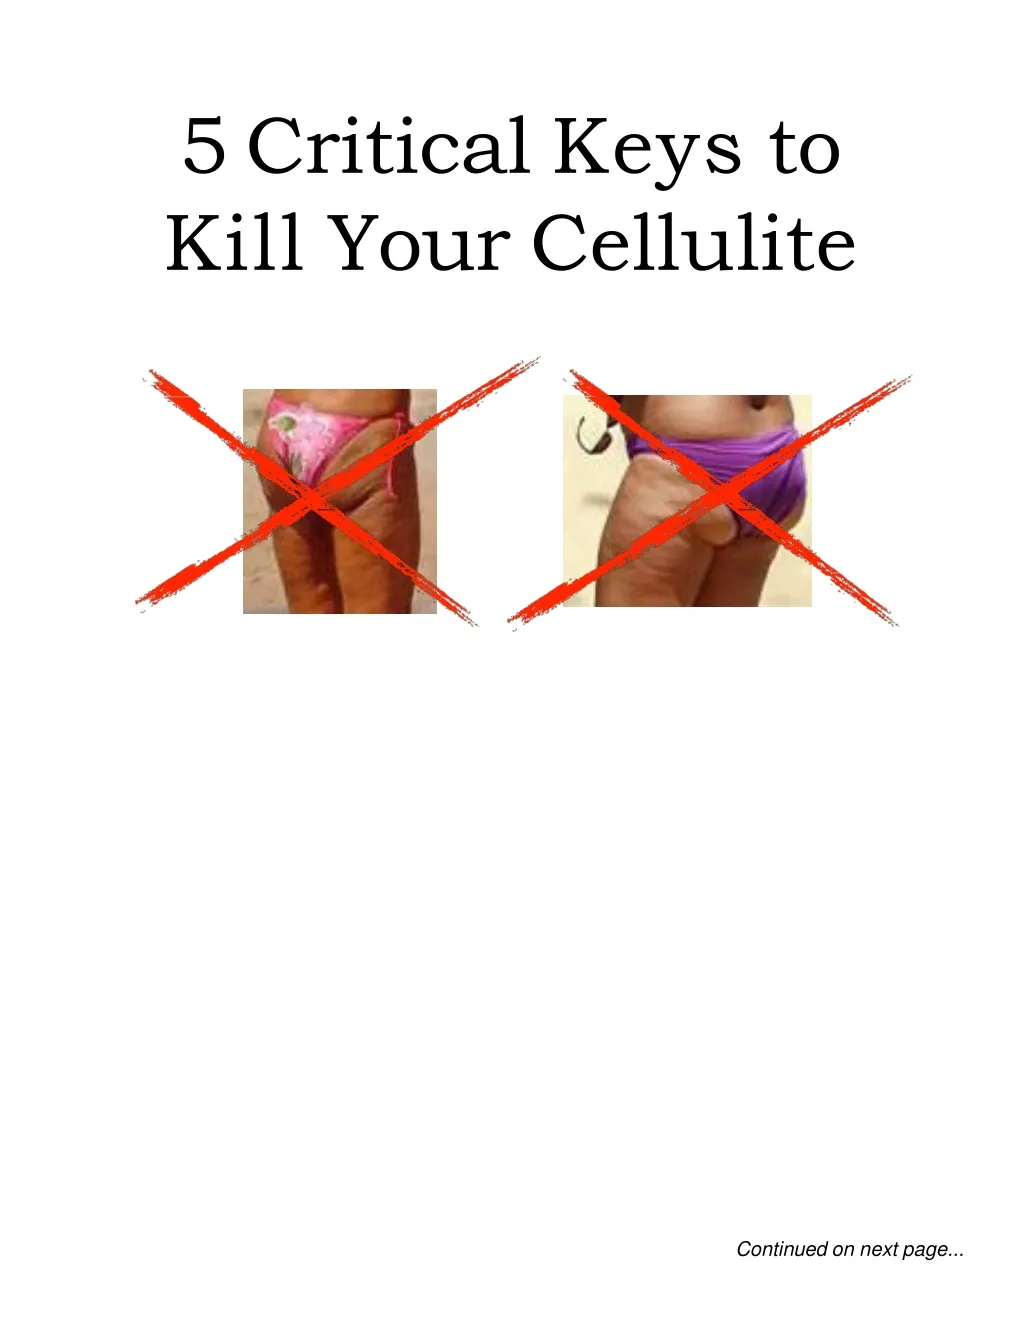 5 critical keys to kill your cellulite